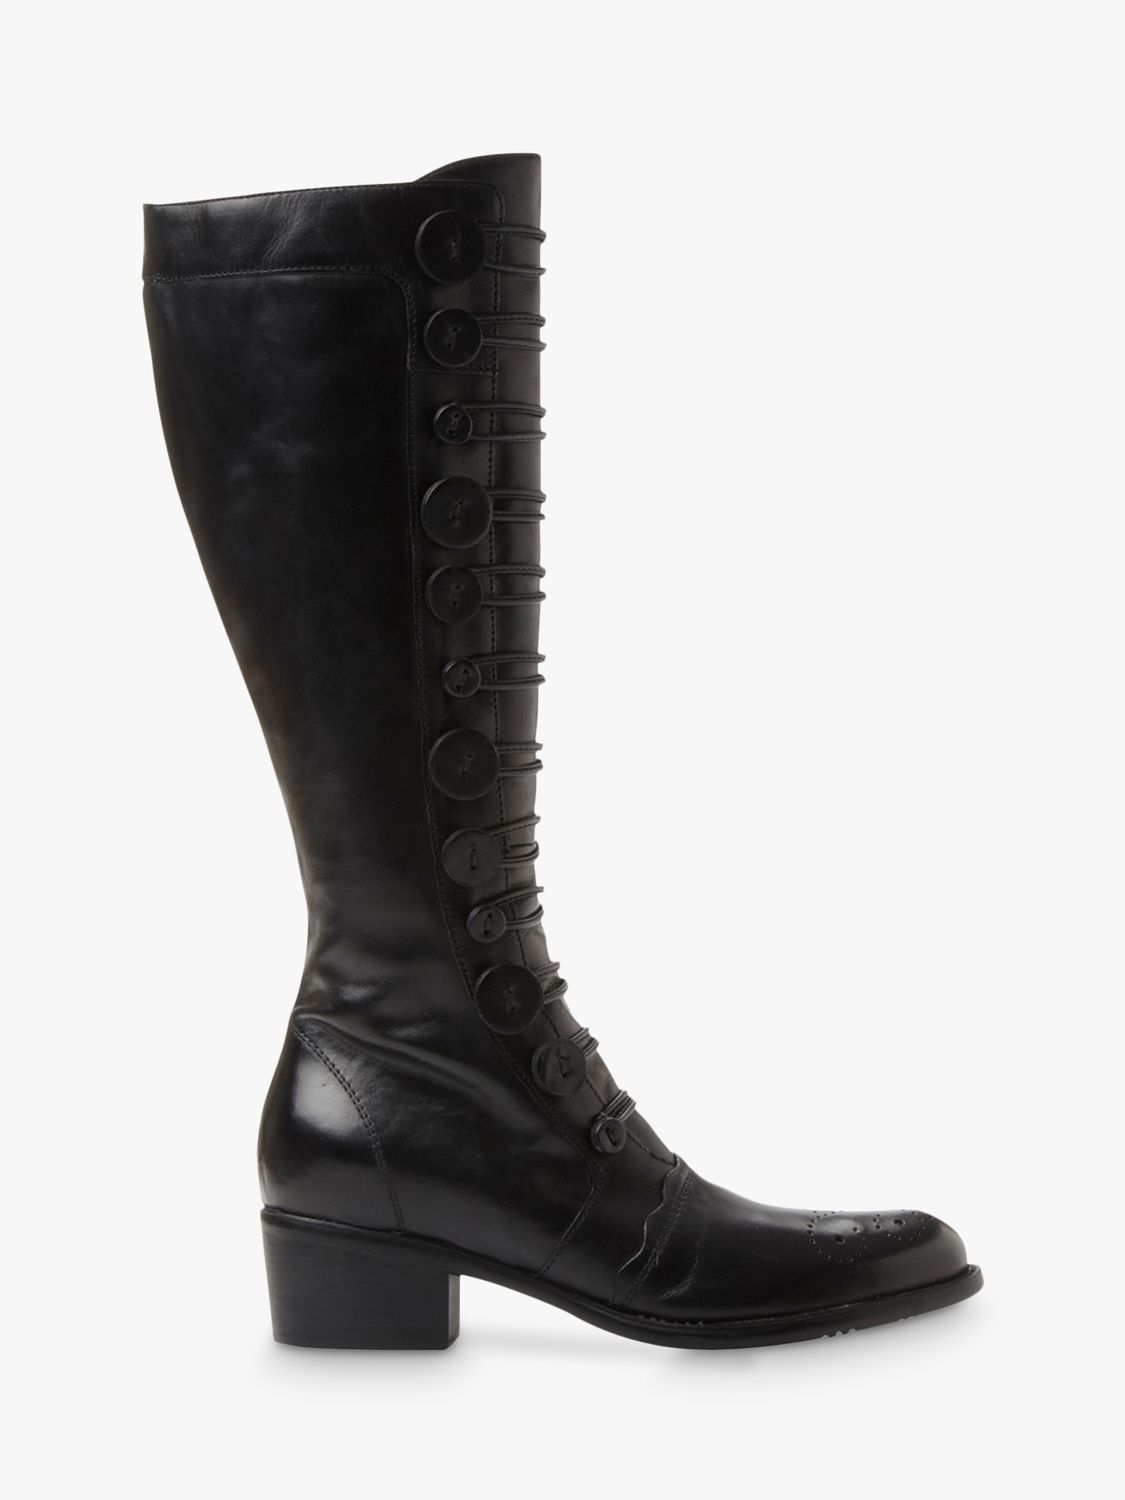 Dune Pixie D Button Detail Knee High Boots, Black Leather at John Lewis ...